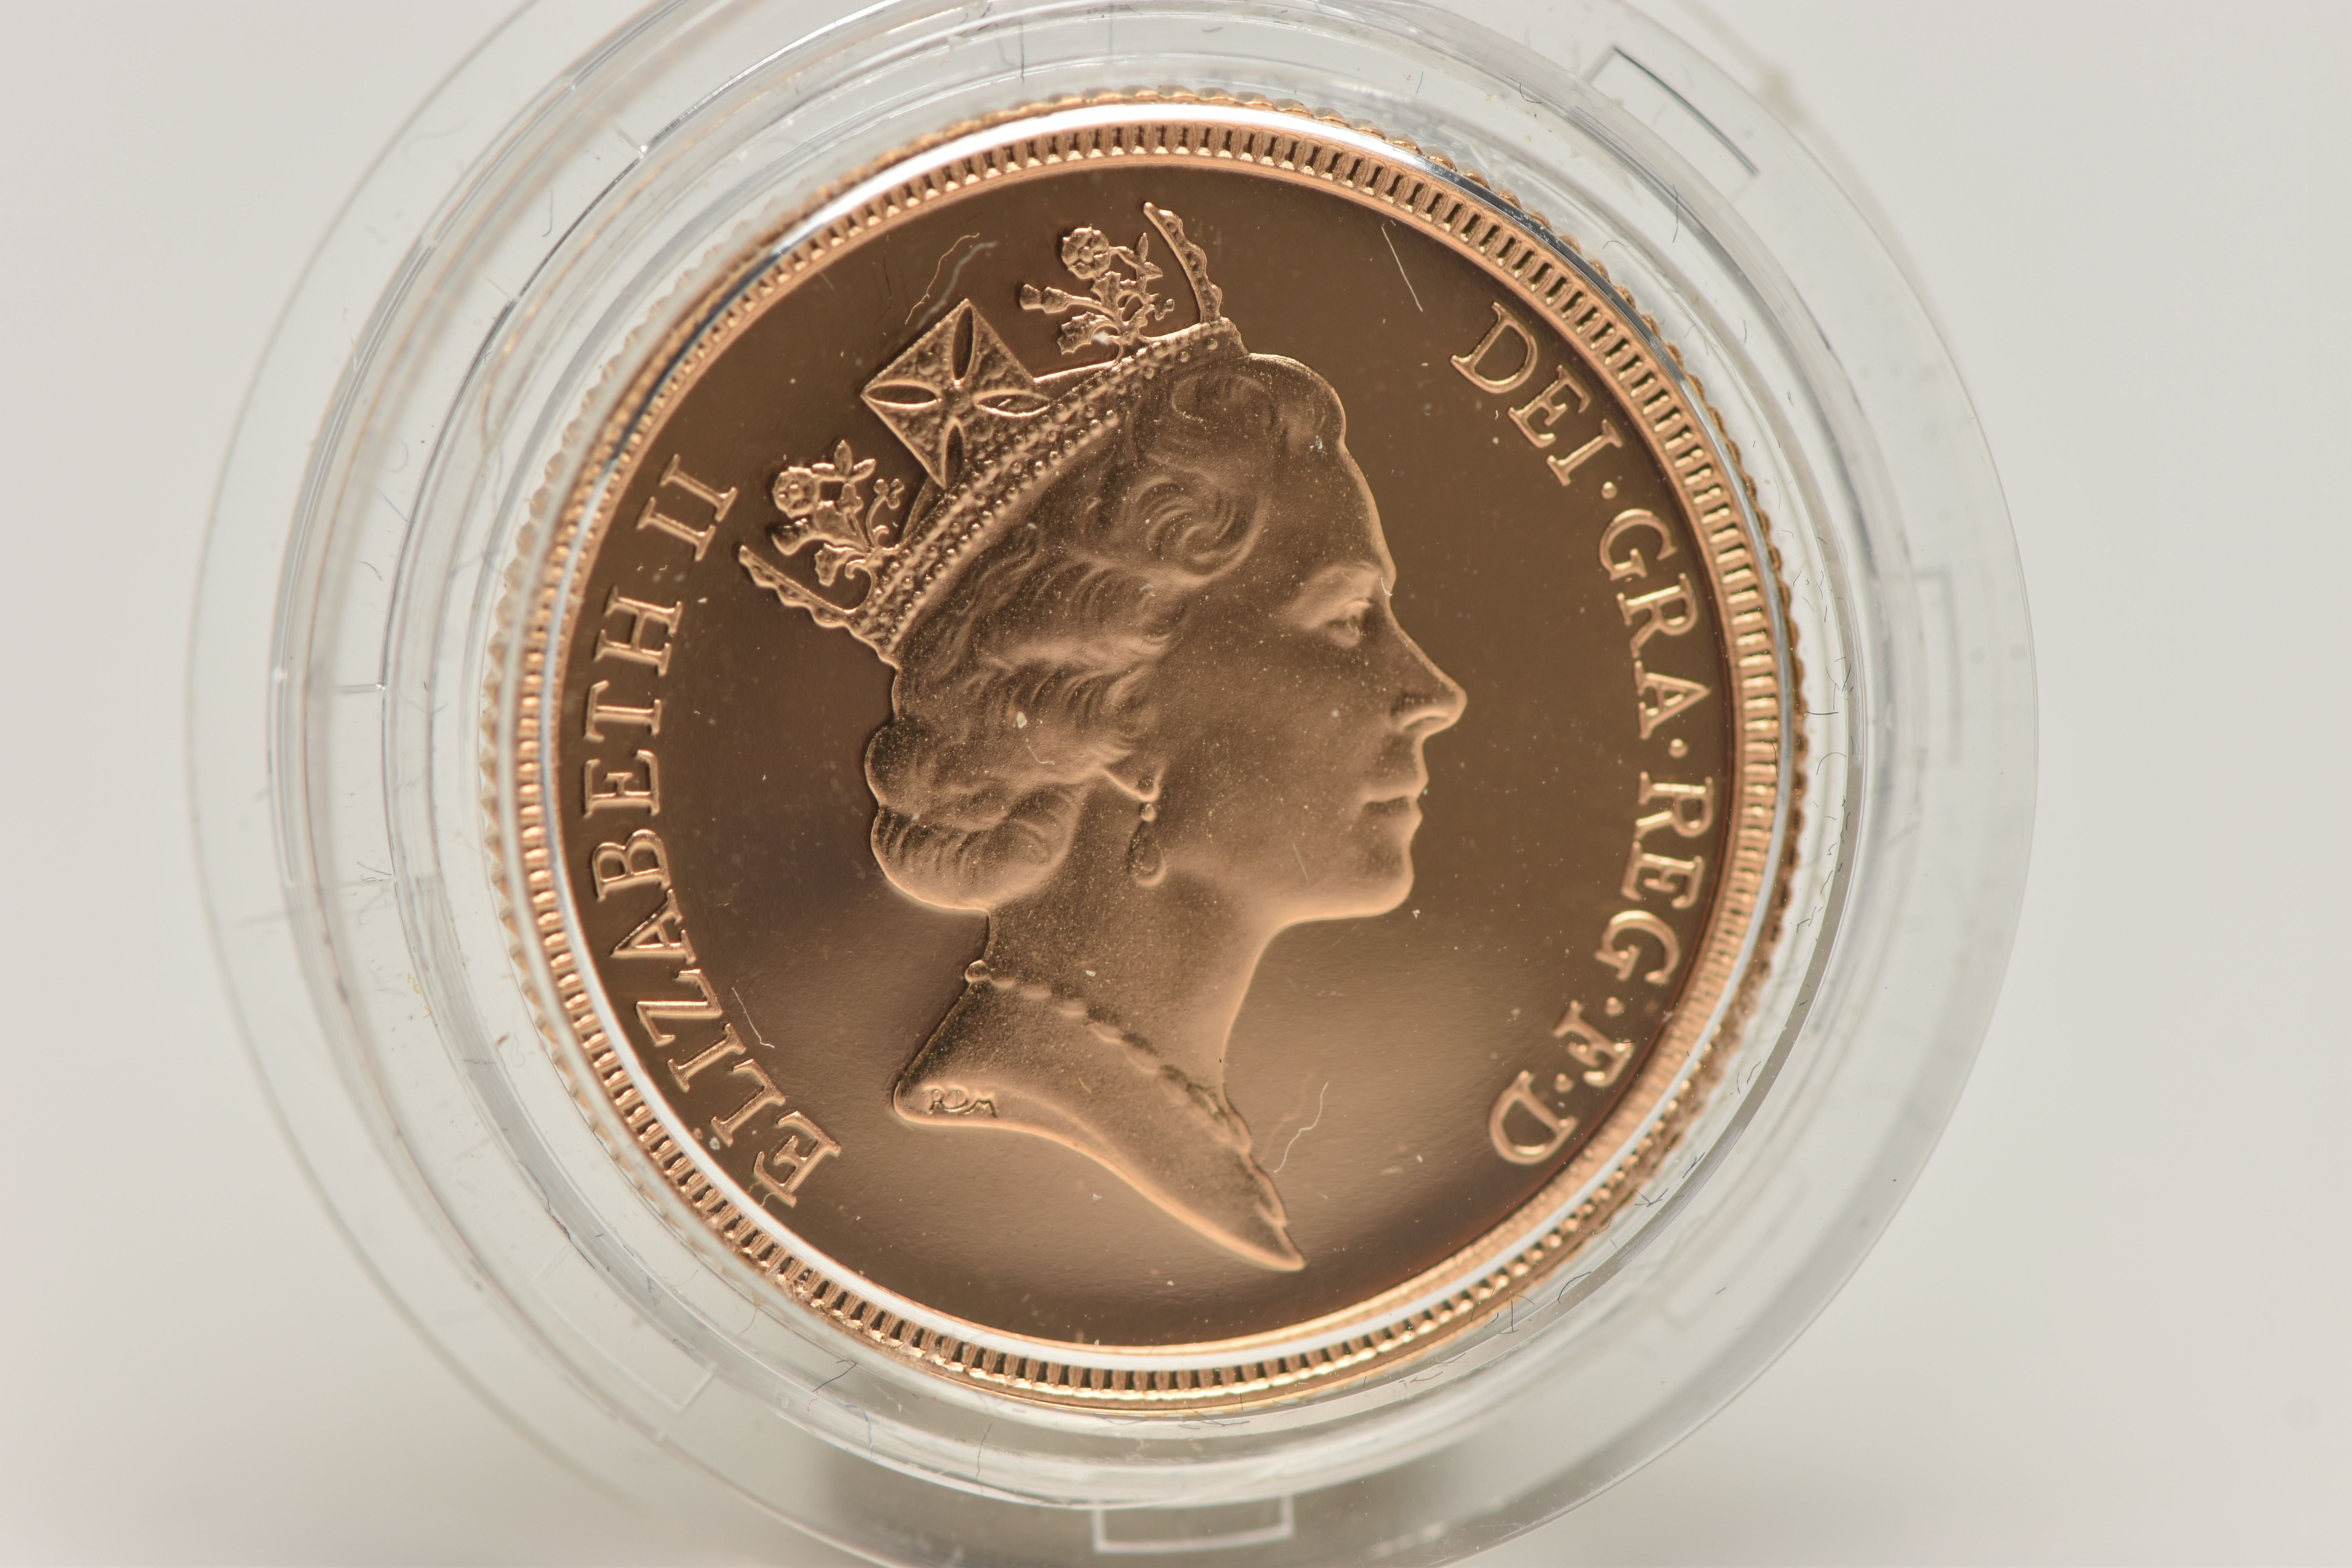 ROYAL MINT FULL GOLD PROOF SOVEREIGN COIN QUEEN ELIZABETH II 1986, .916 fine, 7.98 gram, 22.05mm, - Image 2 of 2